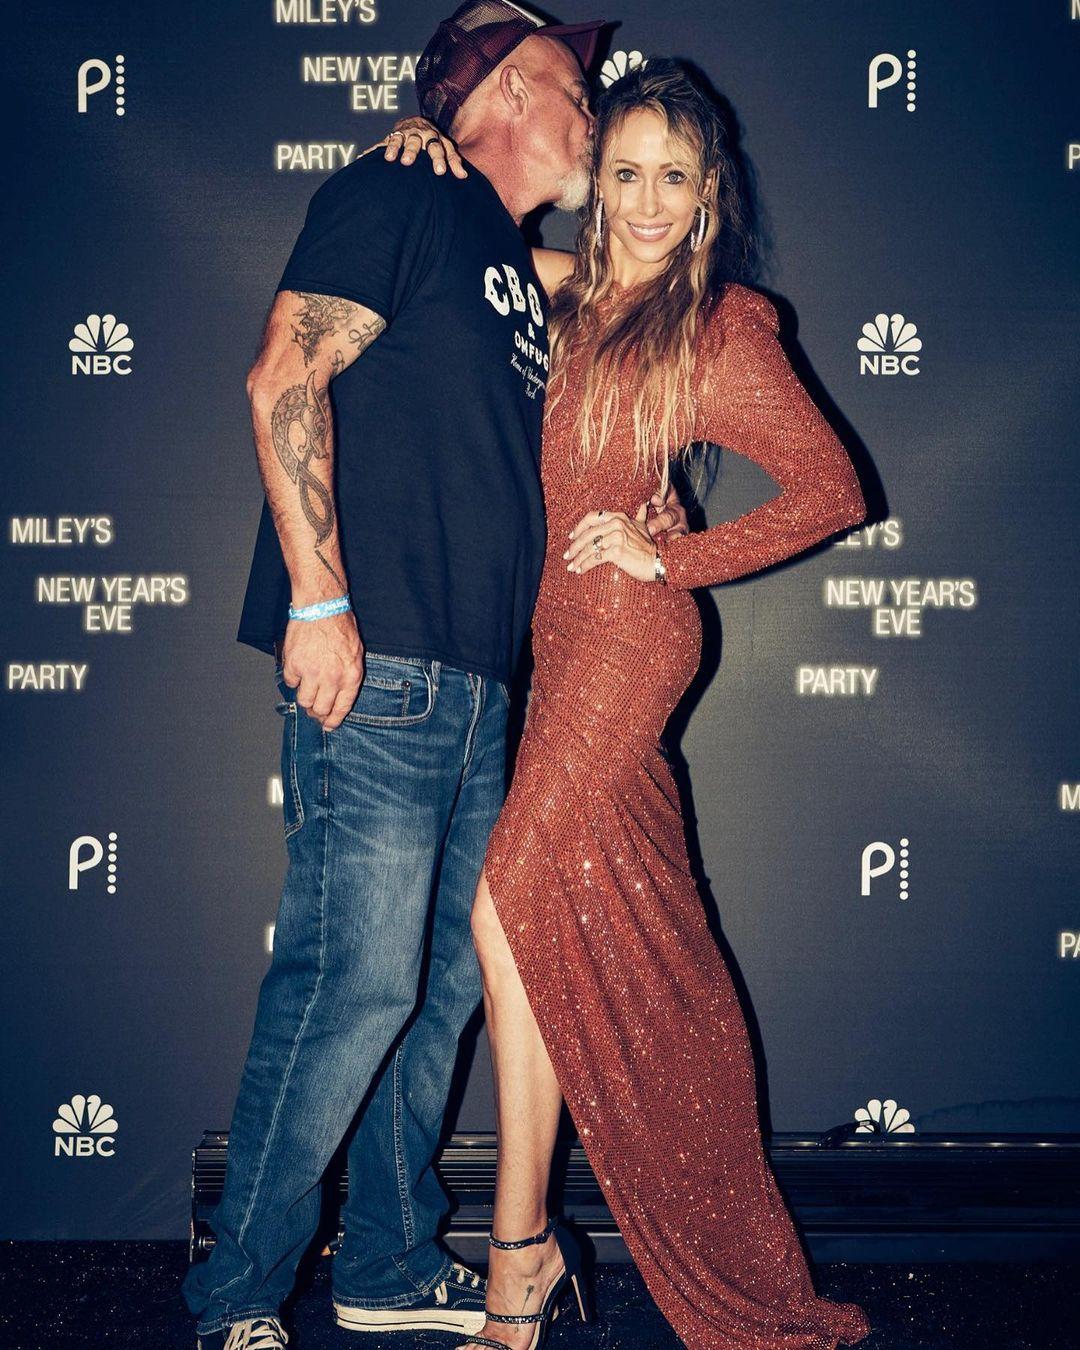 Tish Cyrus and Dominic Purcell make Red carpet debut